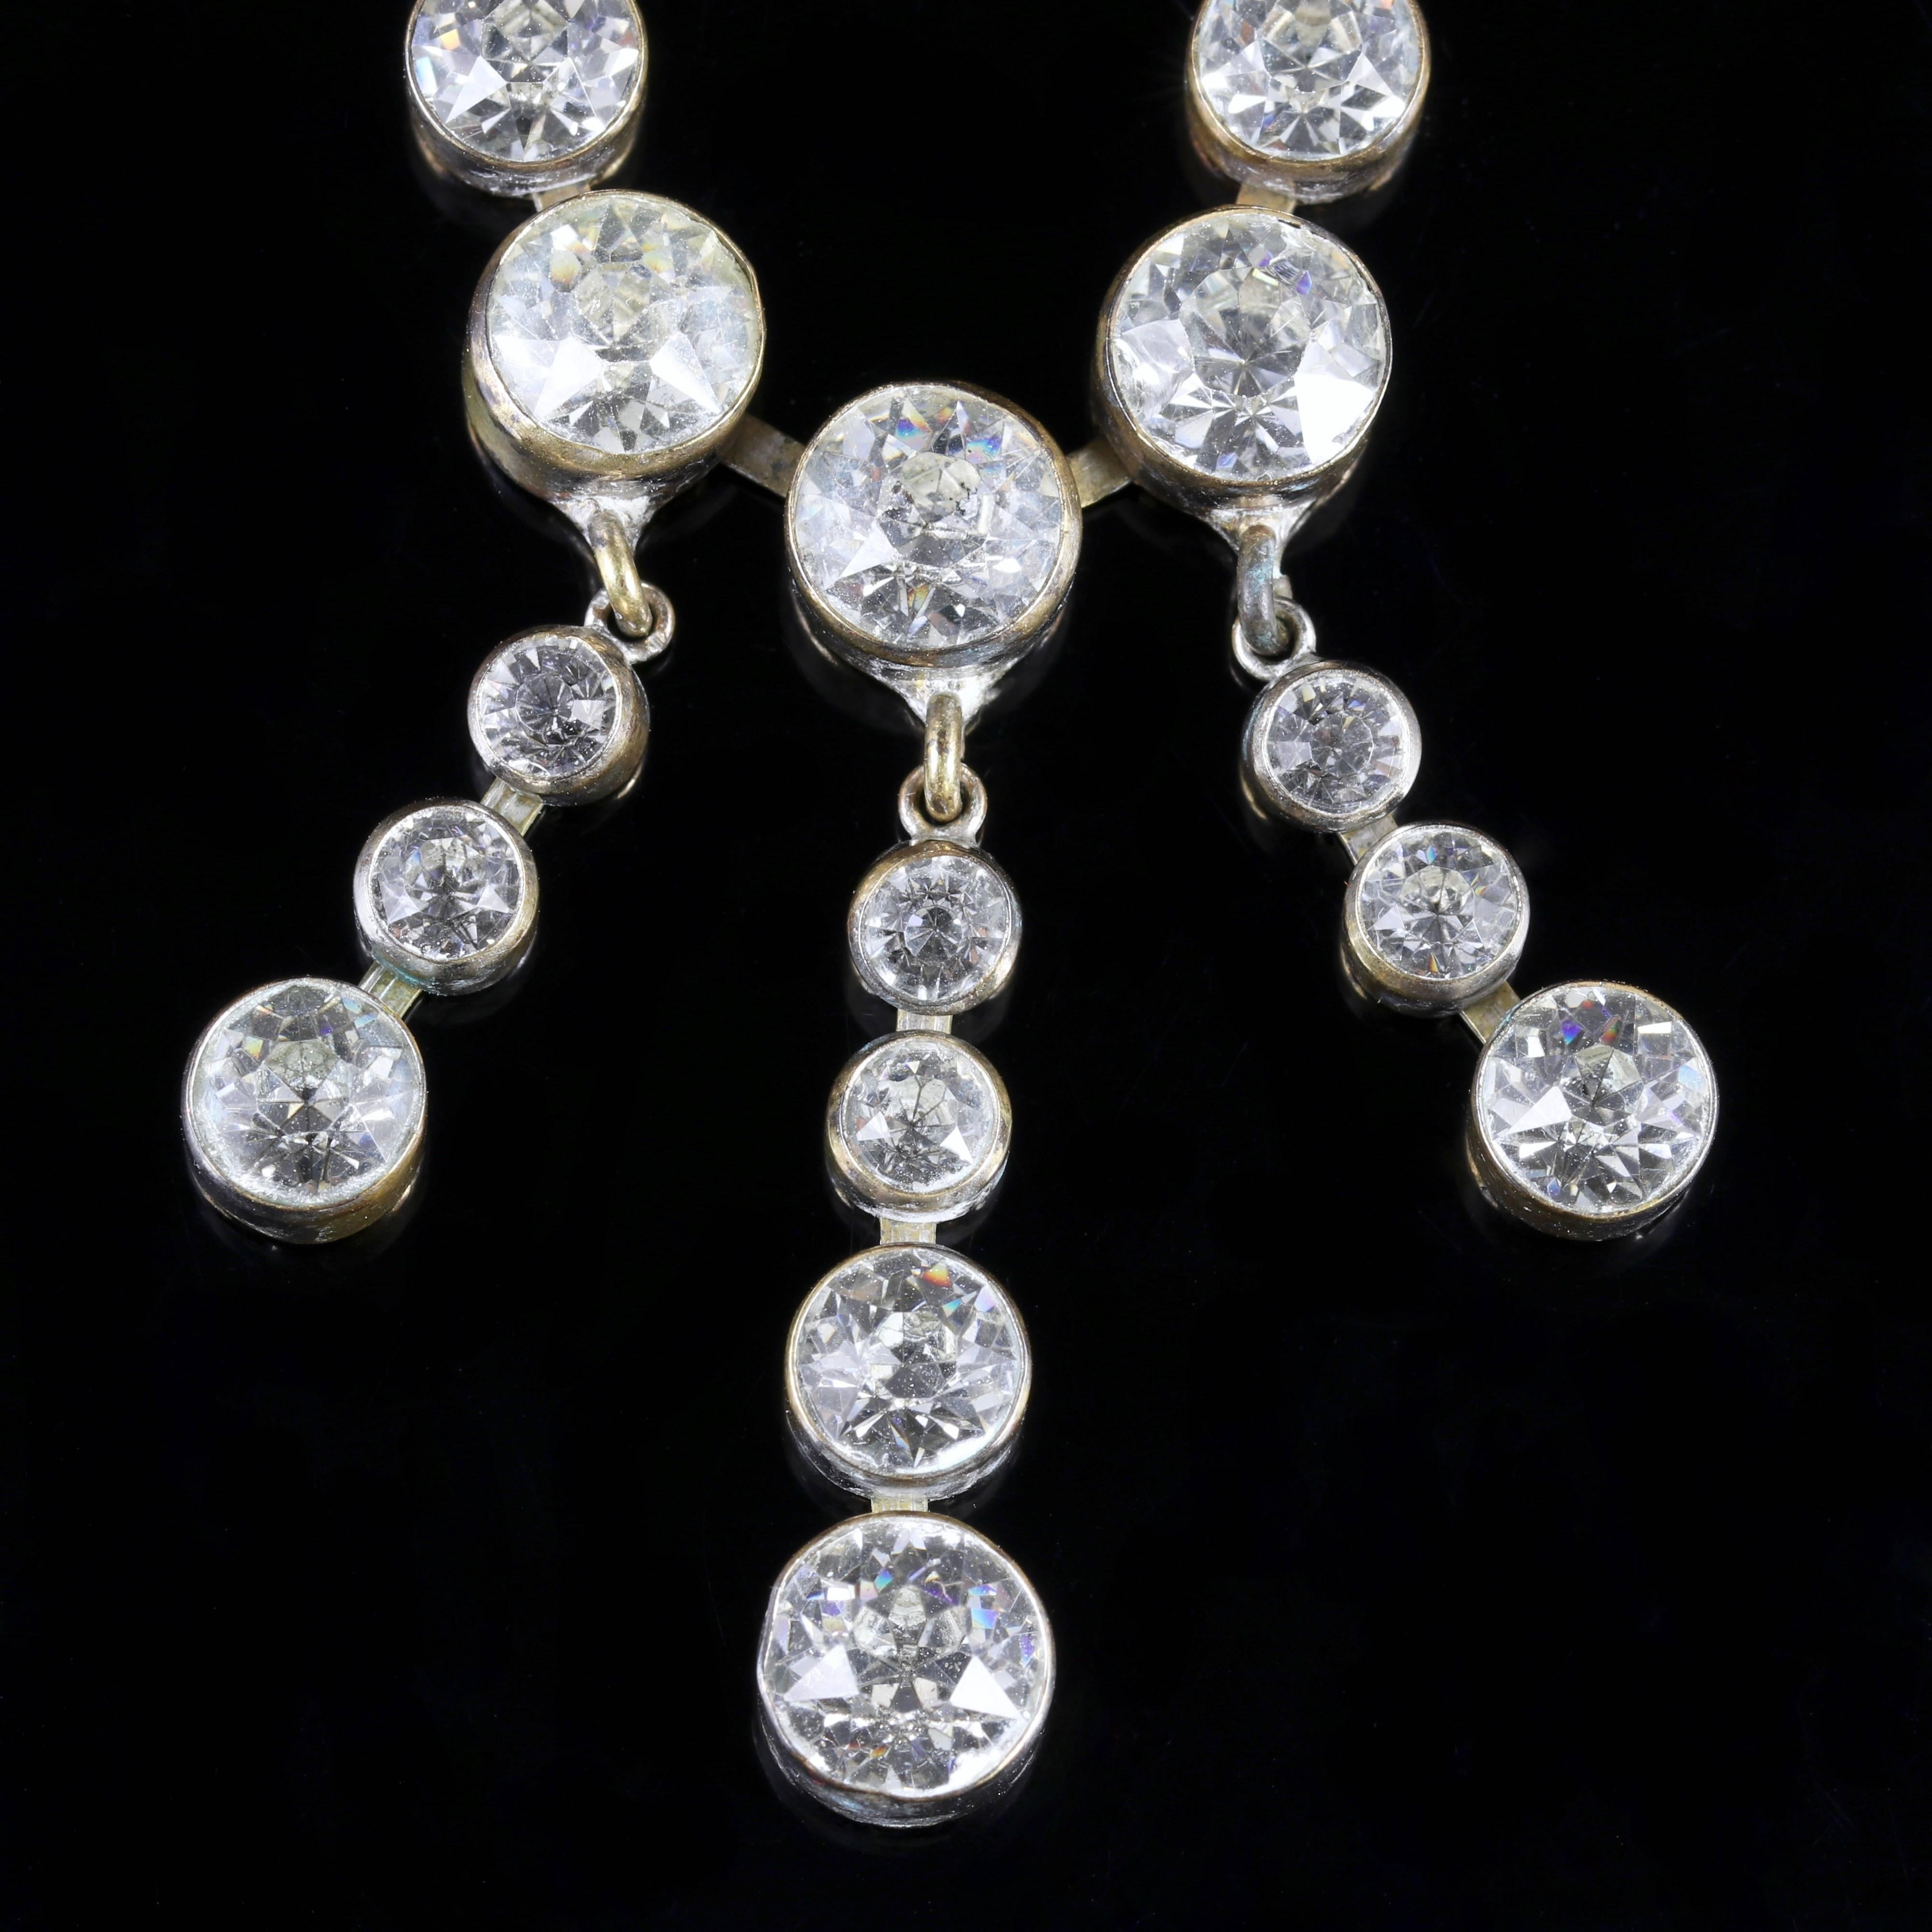 This fabulous long Georgian paste necklace is Circa 1800.

Beautiful old cut white Paste Stones sit in the Silver gallery and sparkle beautifully. 

Paste is a heavy, very transparent flint glass that stimulates the fire and brilliance of gemstones.